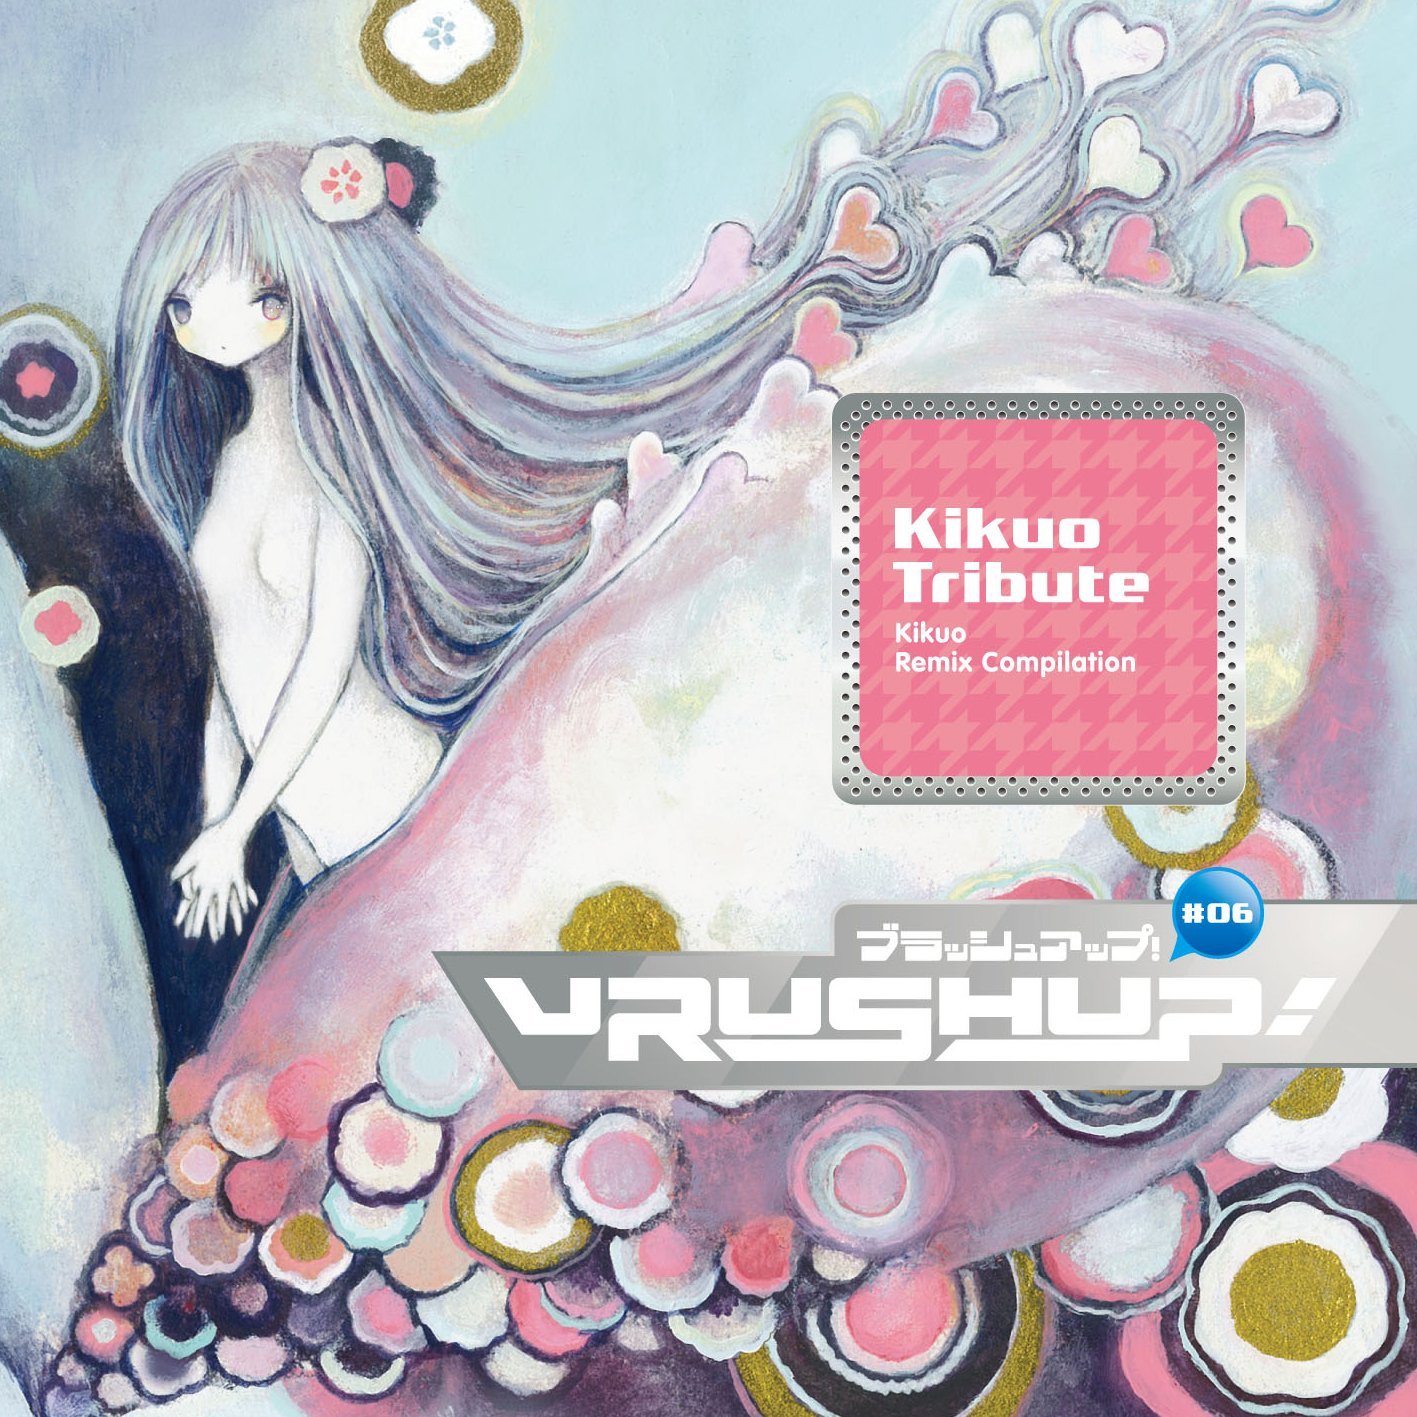 VRUSH UP! #06 -Kikuo Tribute- - Various artists - Vocaloid Database